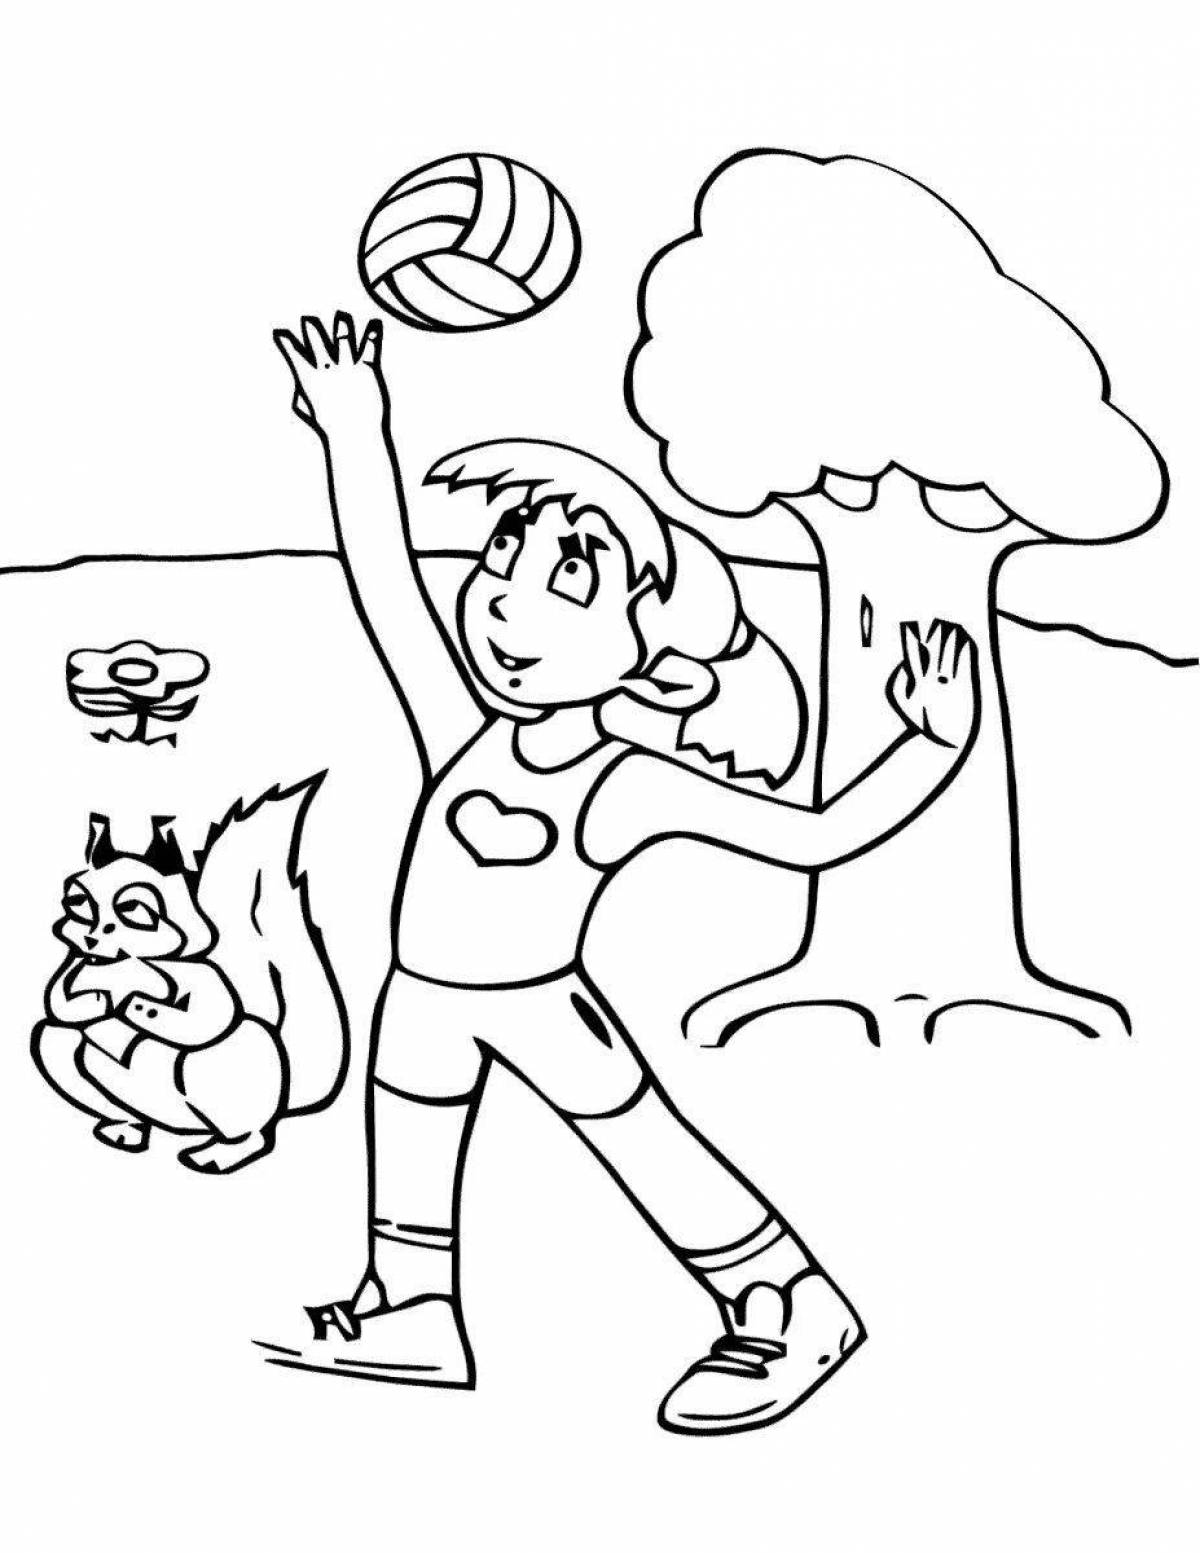 Happy health day coloring page